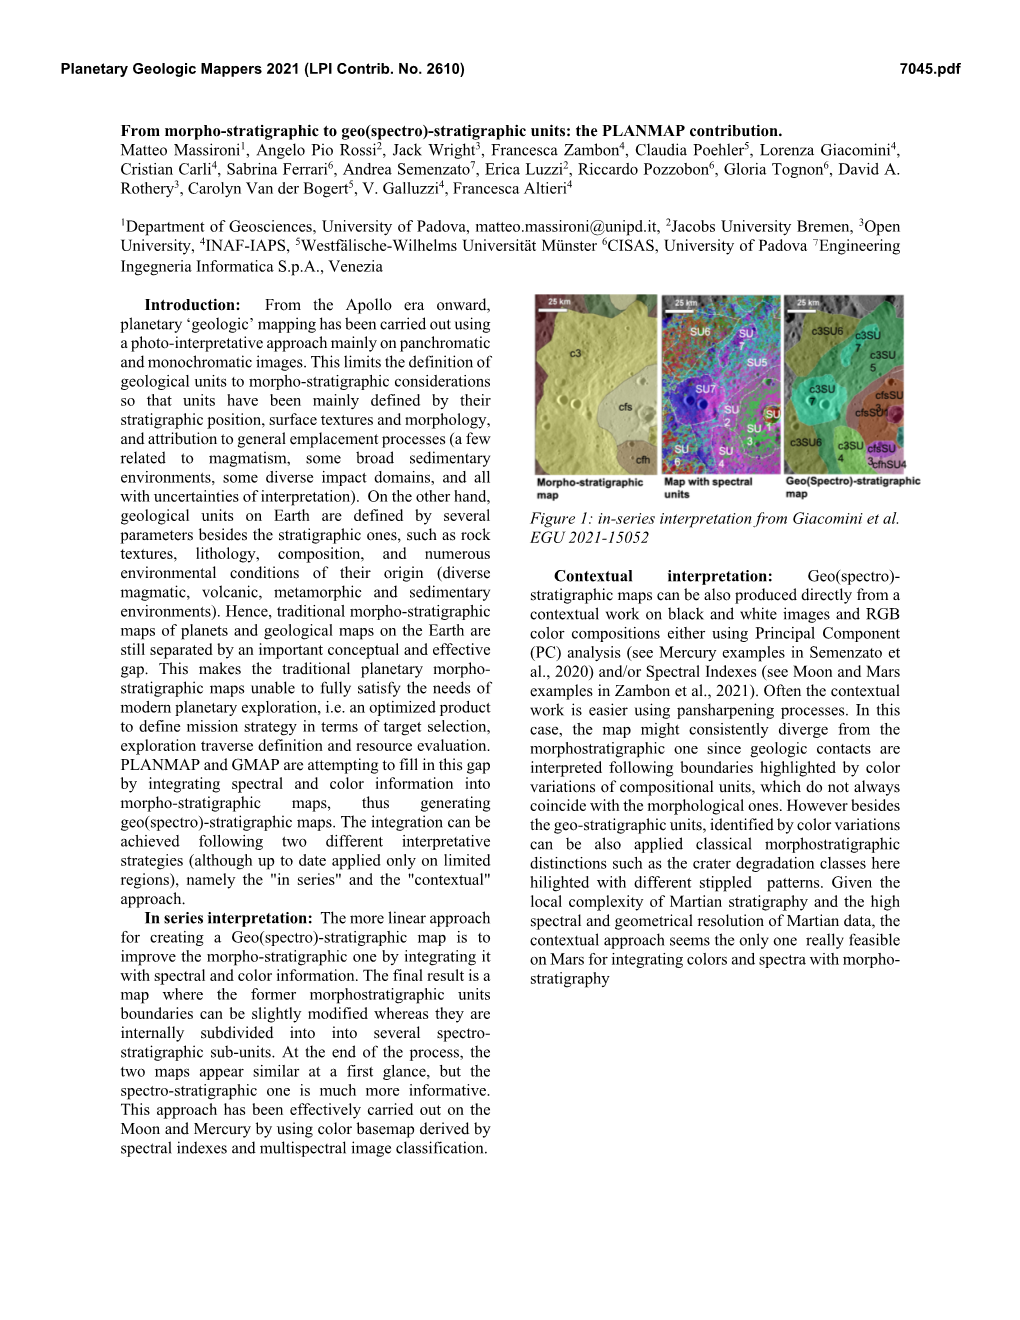 From Morpho-Stratigraphic to Geo(Spectro)-Stratigraphic Units: the PLANMAP Contribution